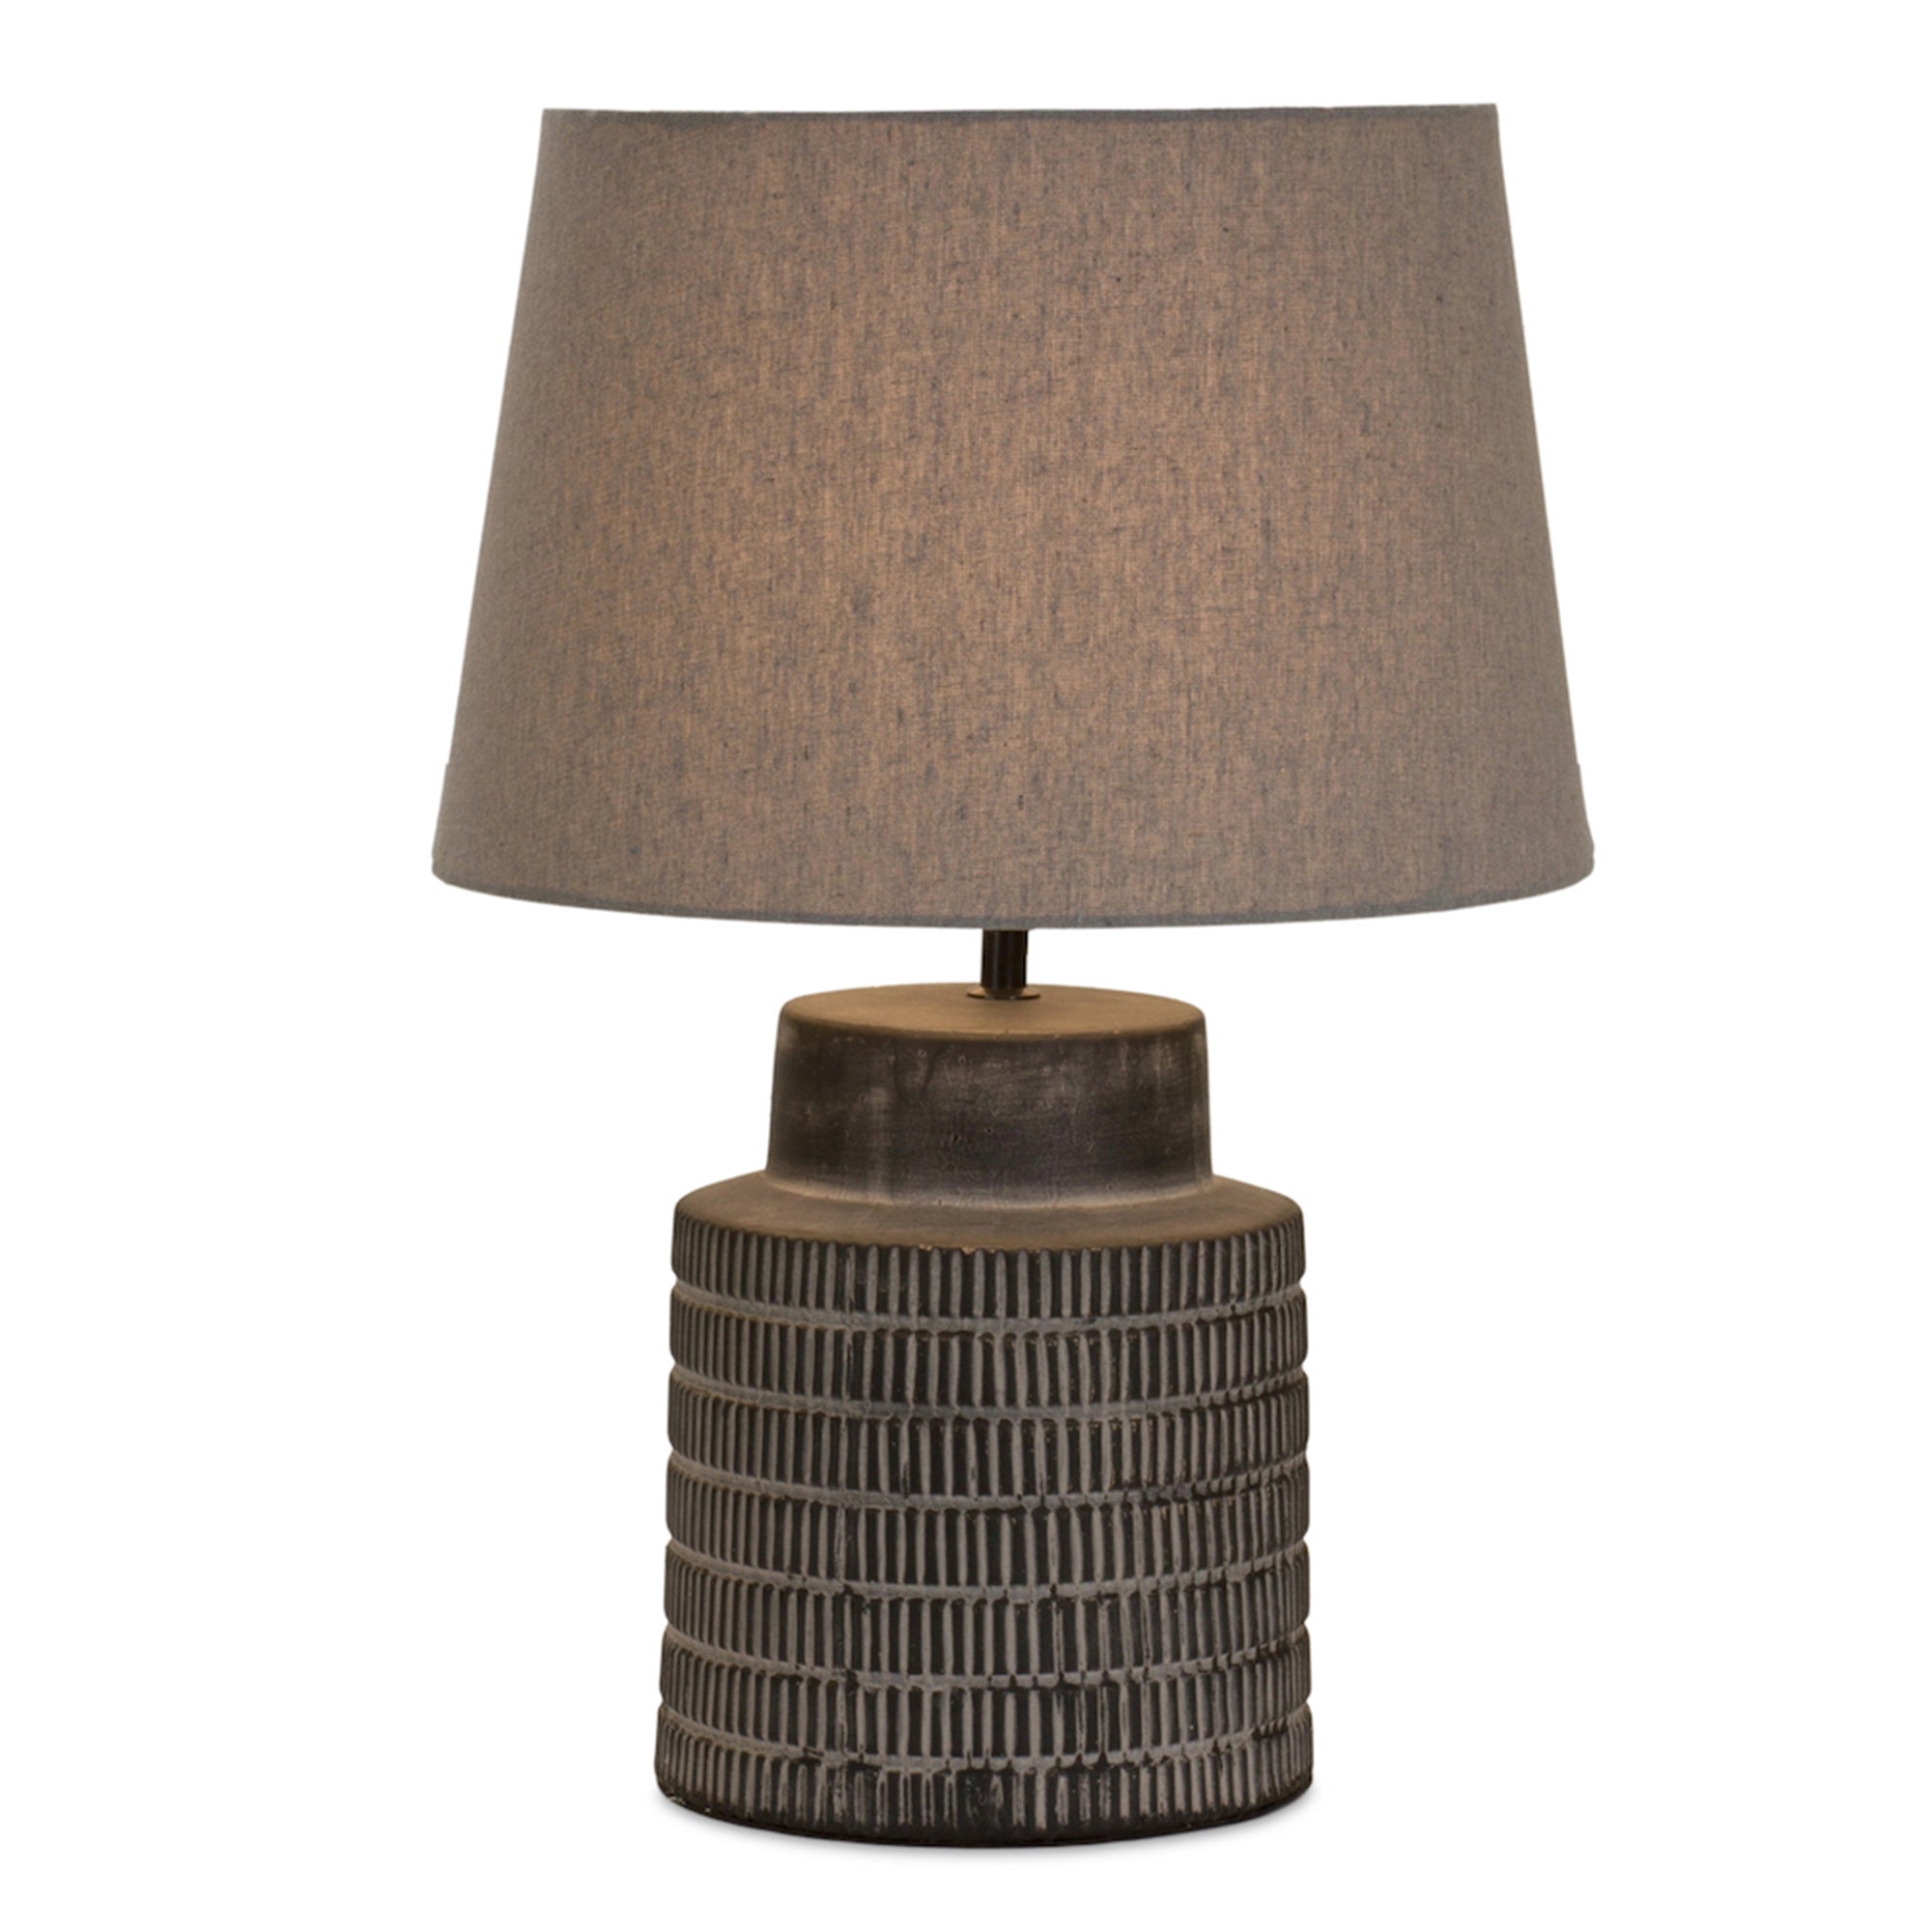 Etched Terra Cotta Table Lamp 21"H